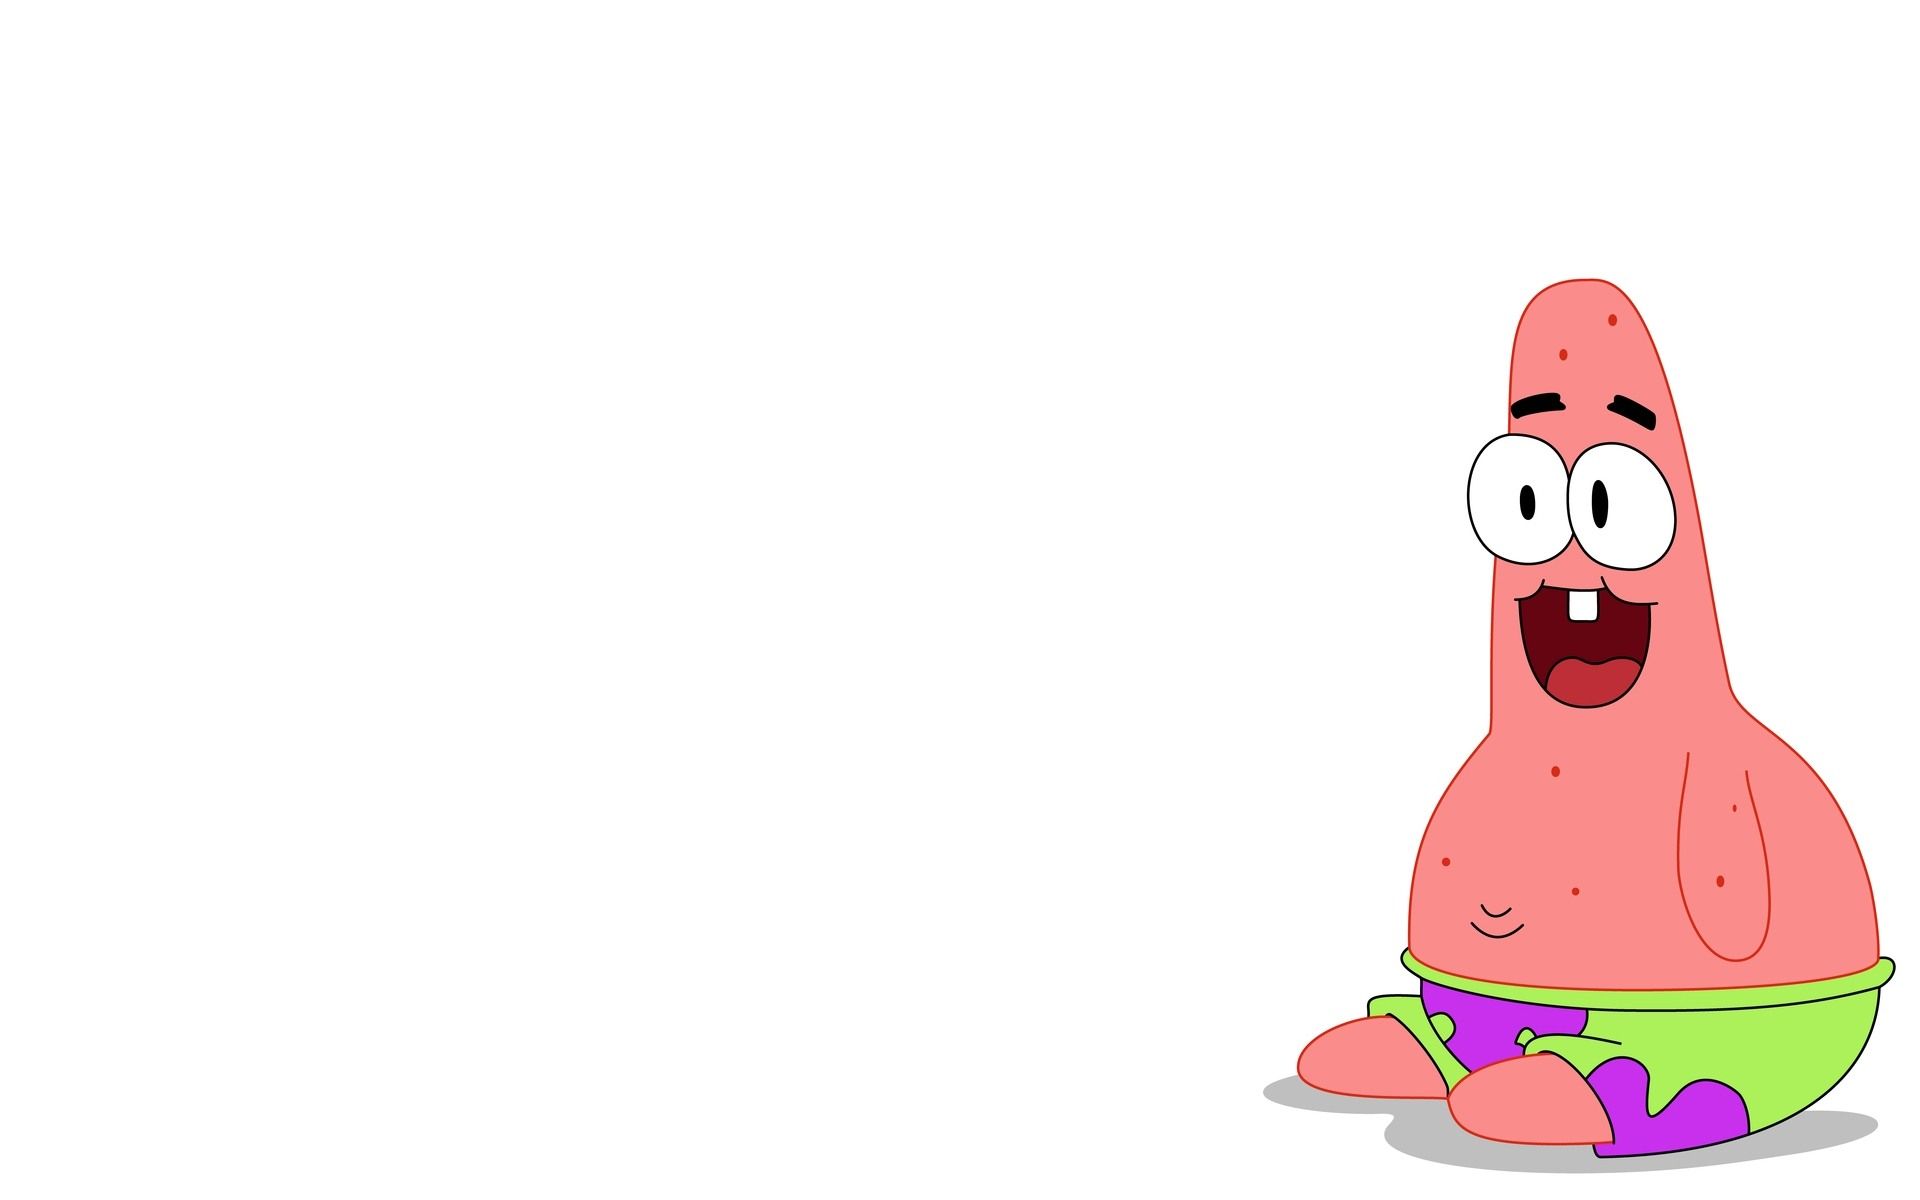 Spongebob Squarepants And Patrick Wallpapers - Sometimes All You Can Do Is Laugh - HD Wallpaper 